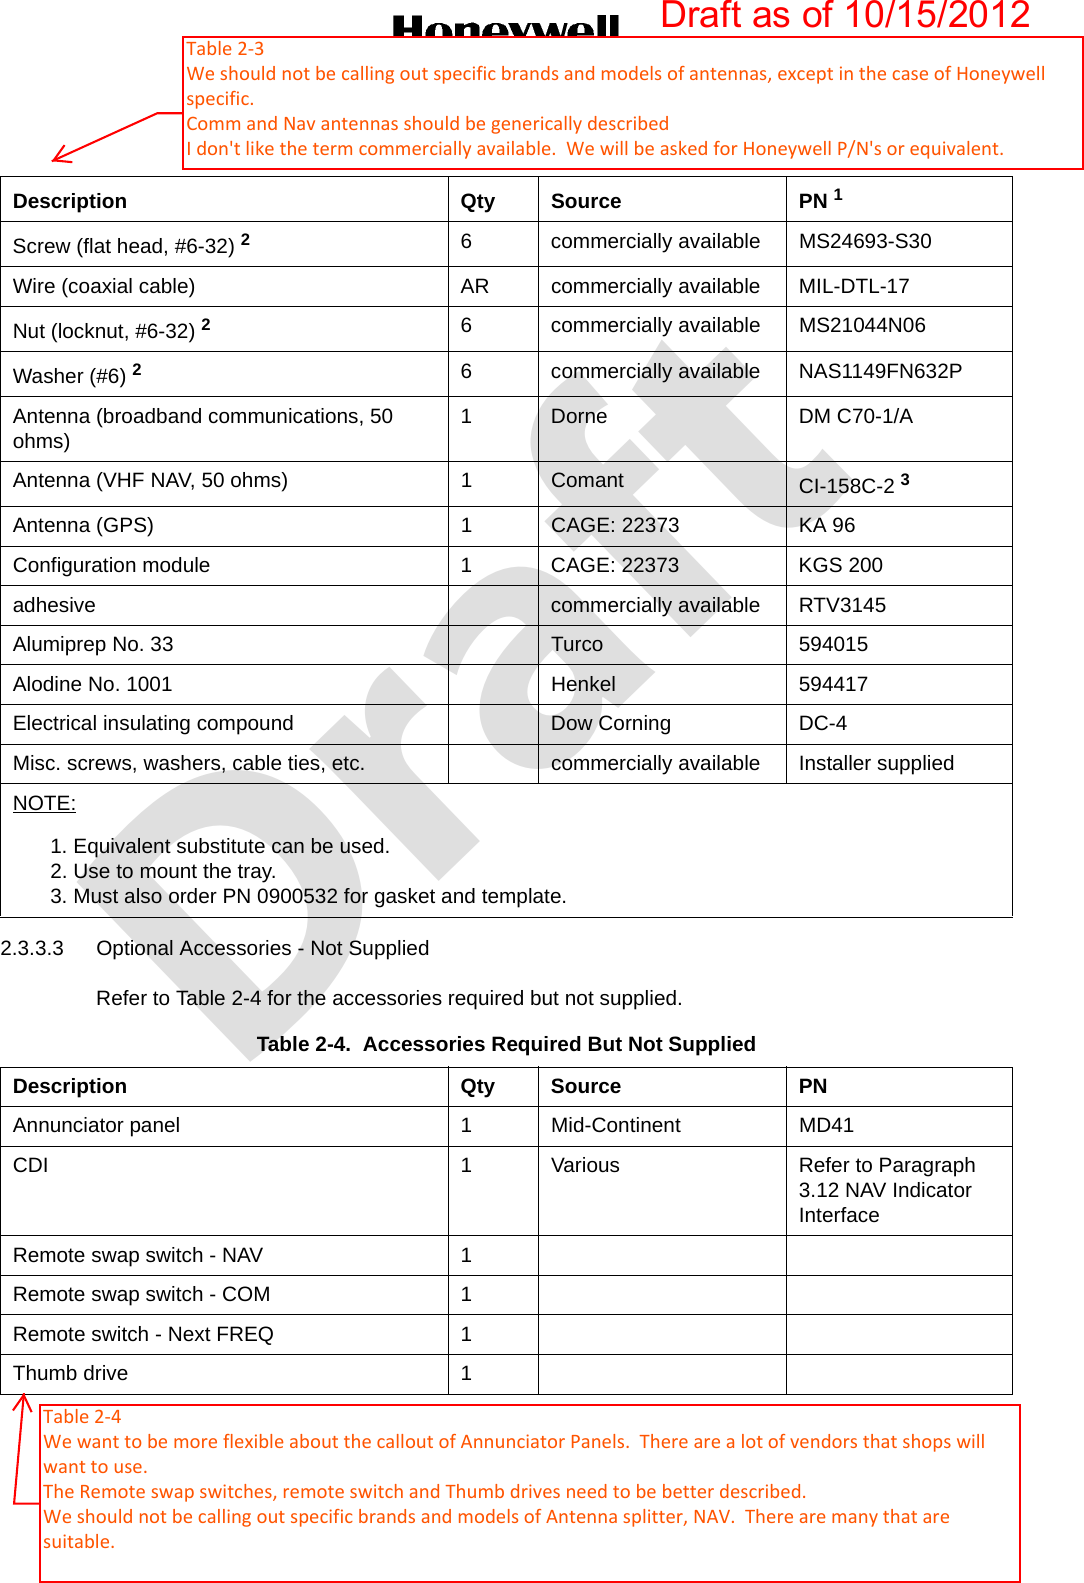 DraftPage 2-56 Dec 201234-70-06SYSTEM INSTALLATION MANUAL066-01204 / 066-01213© Honeywell International Inc. Do not copy without express permission of Honeywell.2.3.3.3 Optional Accessories - Not SuppliedRefer to Table 2-4 for the accessories required but not supplied. Screw (flat head, #6-32) 26 commercially available MS24693-S30Wire (coaxial cable) AR commercially available MIL-DTL-17Nut (locknut, #6-32) 26 commercially available MS21044N06Washer (#6) 26 commercially available NAS1149FN632PAntenna (broadband communications, 50 ohms) 1 Dorne DM C70-1/AAntenna (VHF NAV, 50 ohms) 1 Comant CI-158C-2 3Antenna (GPS) 1 CAGE: 22373 KA 96Configuration module 1 CAGE: 22373 KGS 200adhesive commercially available RTV3145Alumiprep No. 33 Turco 594015Alodine No. 1001 Henkel 594417Electrical insulating compound Dow Corning DC-4Misc. screws, washers, cable ties, etc. commercially available Installer suppliedNOTE:1. Equivalent substitute can be used.2. Use to mount the tray.3. Must also order PN 0900532 for gasket and template.Table 2-4.  Accessories Required But Not Supplied Description Qty Source PNAnnunciator panel 1 Mid-Continent MD41CDI 1 Various Refer to Paragraph 3.12 NAV Indicator InterfaceRemote swap switch - NAV 1Remote swap switch - COM 1Remote switch - Next FREQ 1Thumb drive 1Table 2-3.  Accessories Required But Not Supplied (Cont)Description Qty Source PN 1Draft as of 10/15/2012Table 2-3 We should not be calling out specific brands and models of antennas, except in the case of Honeywell specific. Comm and Nav antennas should be generically described  I don&apos;t like the term commercially available.  We will be asked for Honeywell P/N&apos;s or equivalent. Table 2-4 We want to be more flexible about the callout of Annunciator Panels.  There are a lot of vendors that shops will want to use. The Remote swap switches, remote switch and Thumb drives need to be better described. We should not be calling out specific brands and models of Antenna splitter, NAV.  There are many that are suitable. 